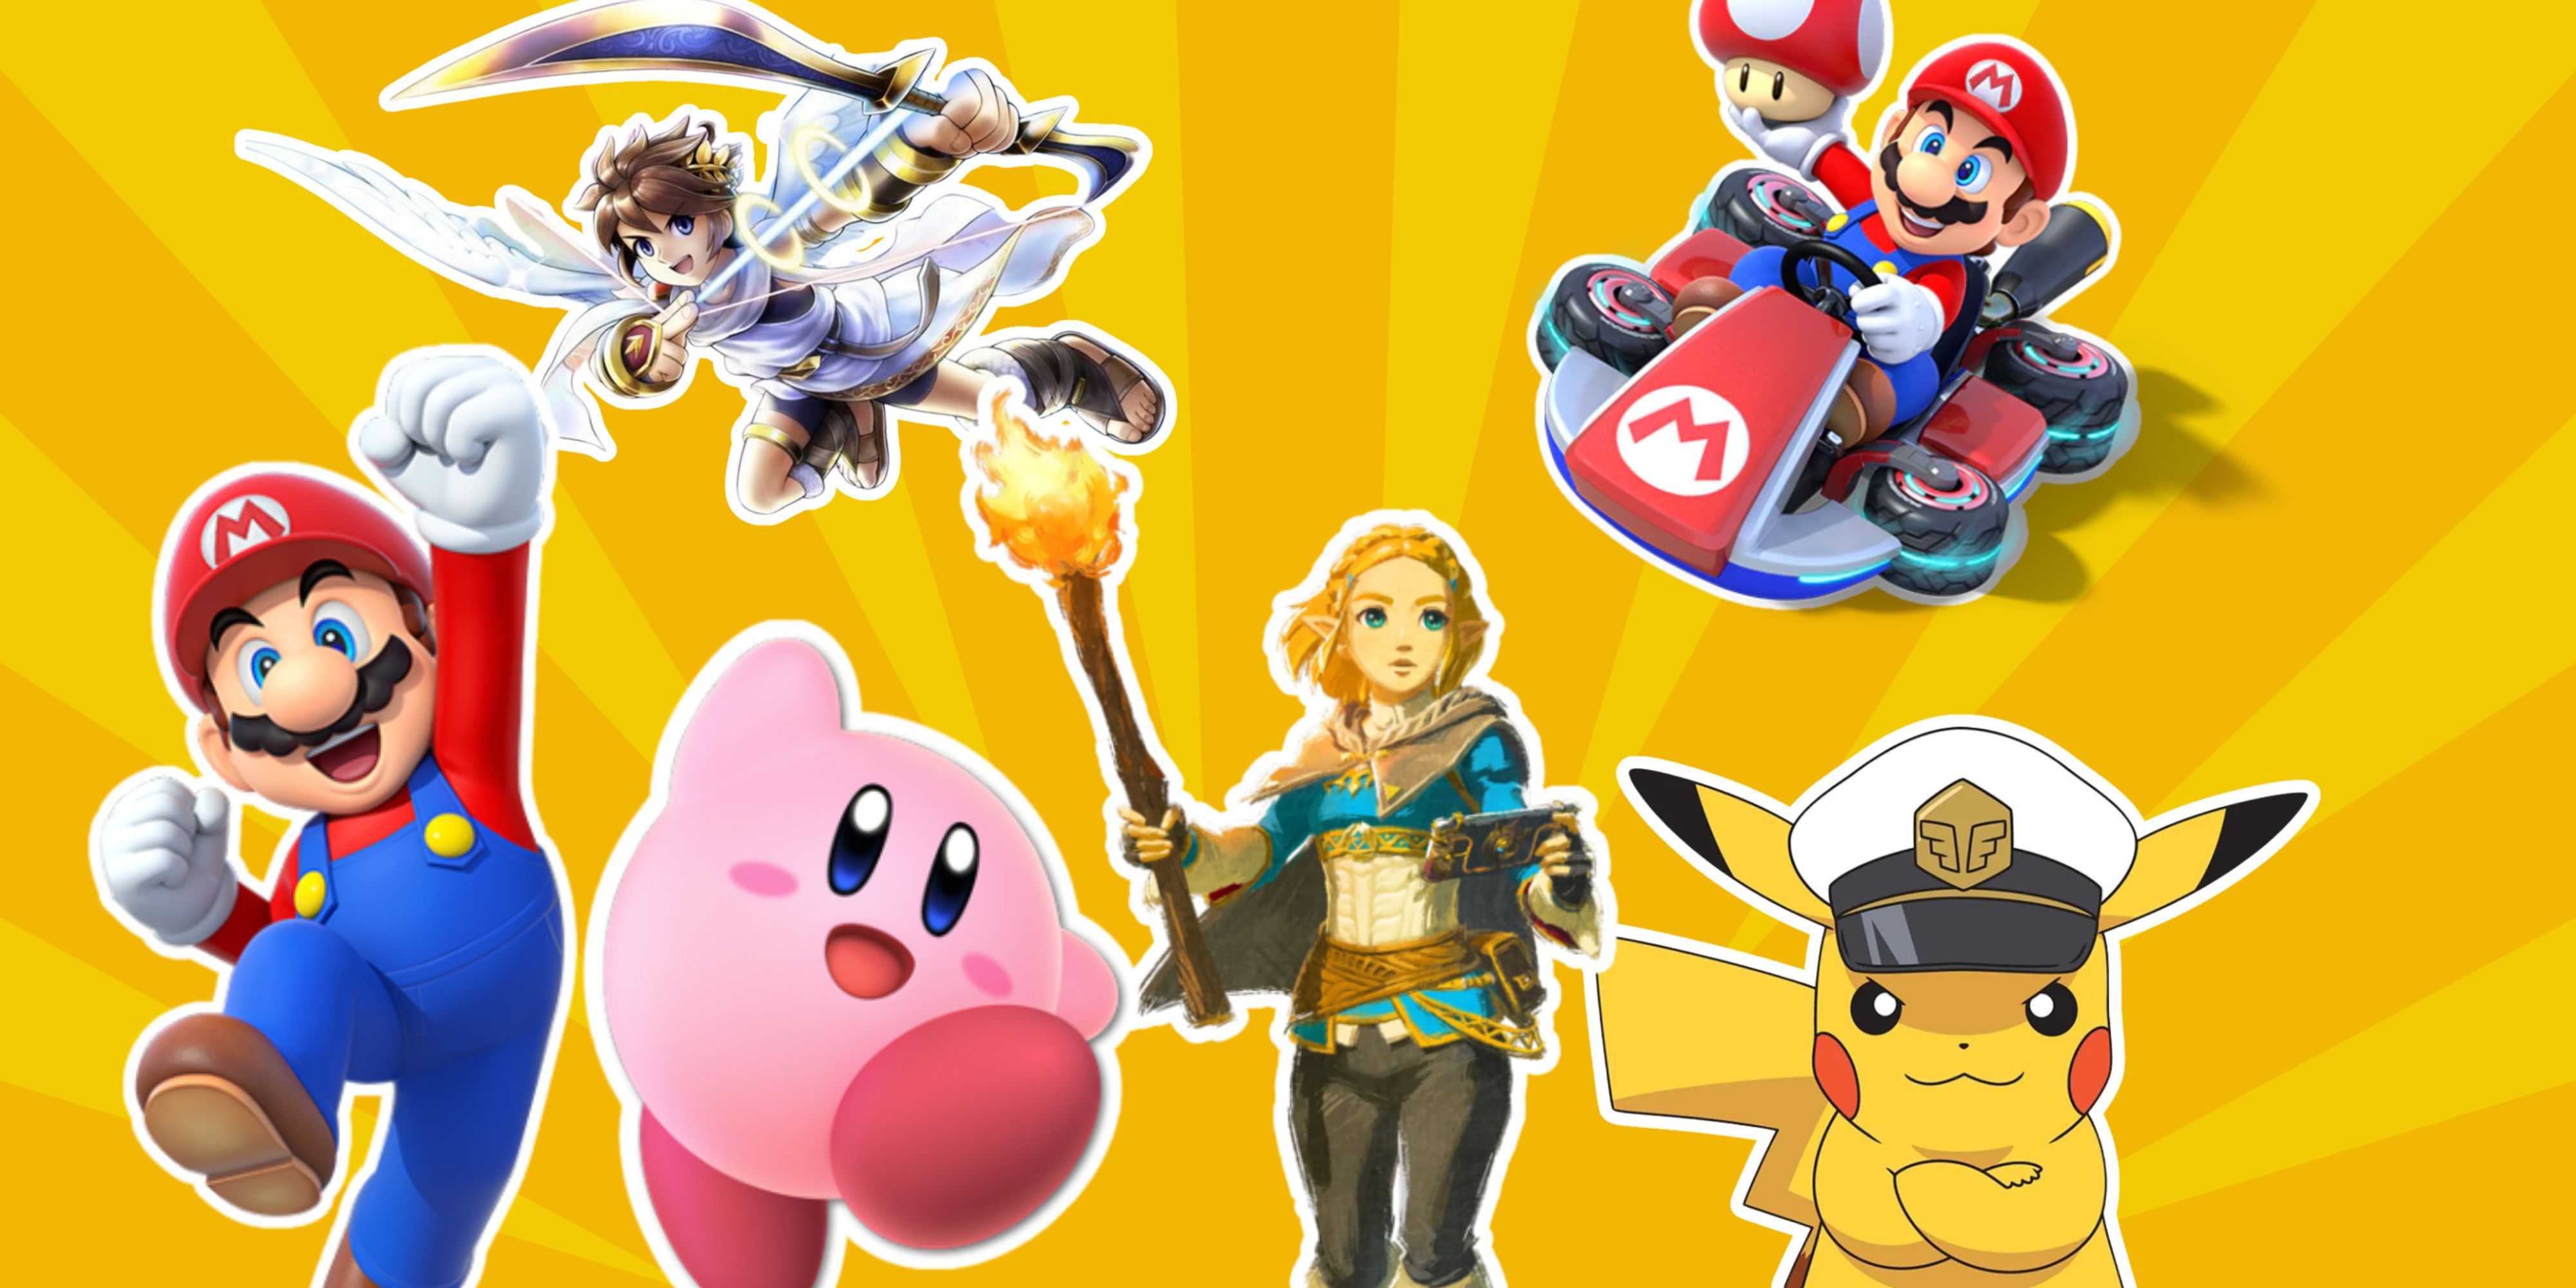 Collage of various Nintendo characters